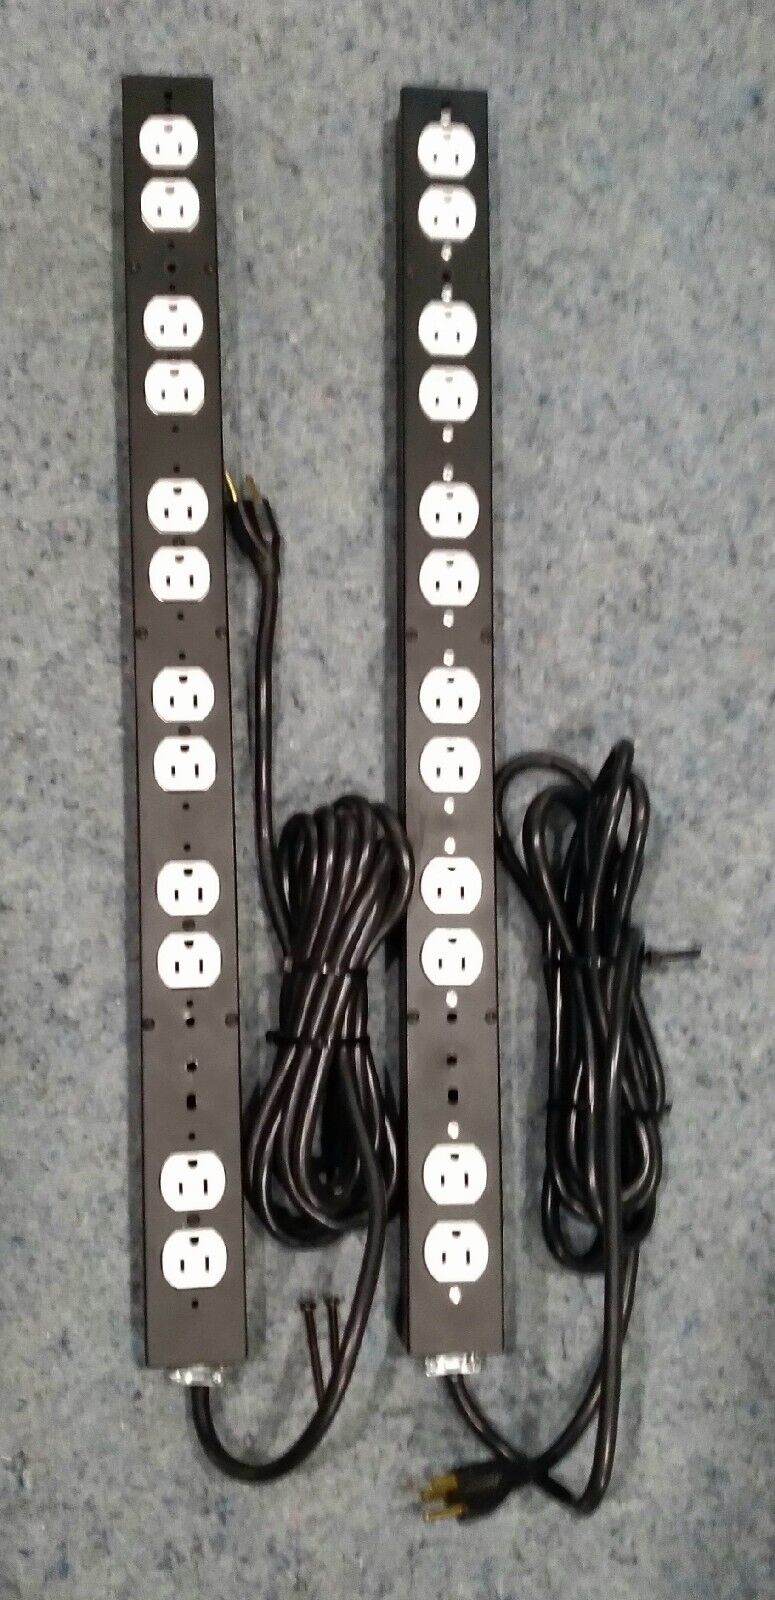 2x LOWELL 12 OUTLET RACK MOUNT POWER SUPPLIES-14 FT CABLE-SUPER NICE-PAIR-15A